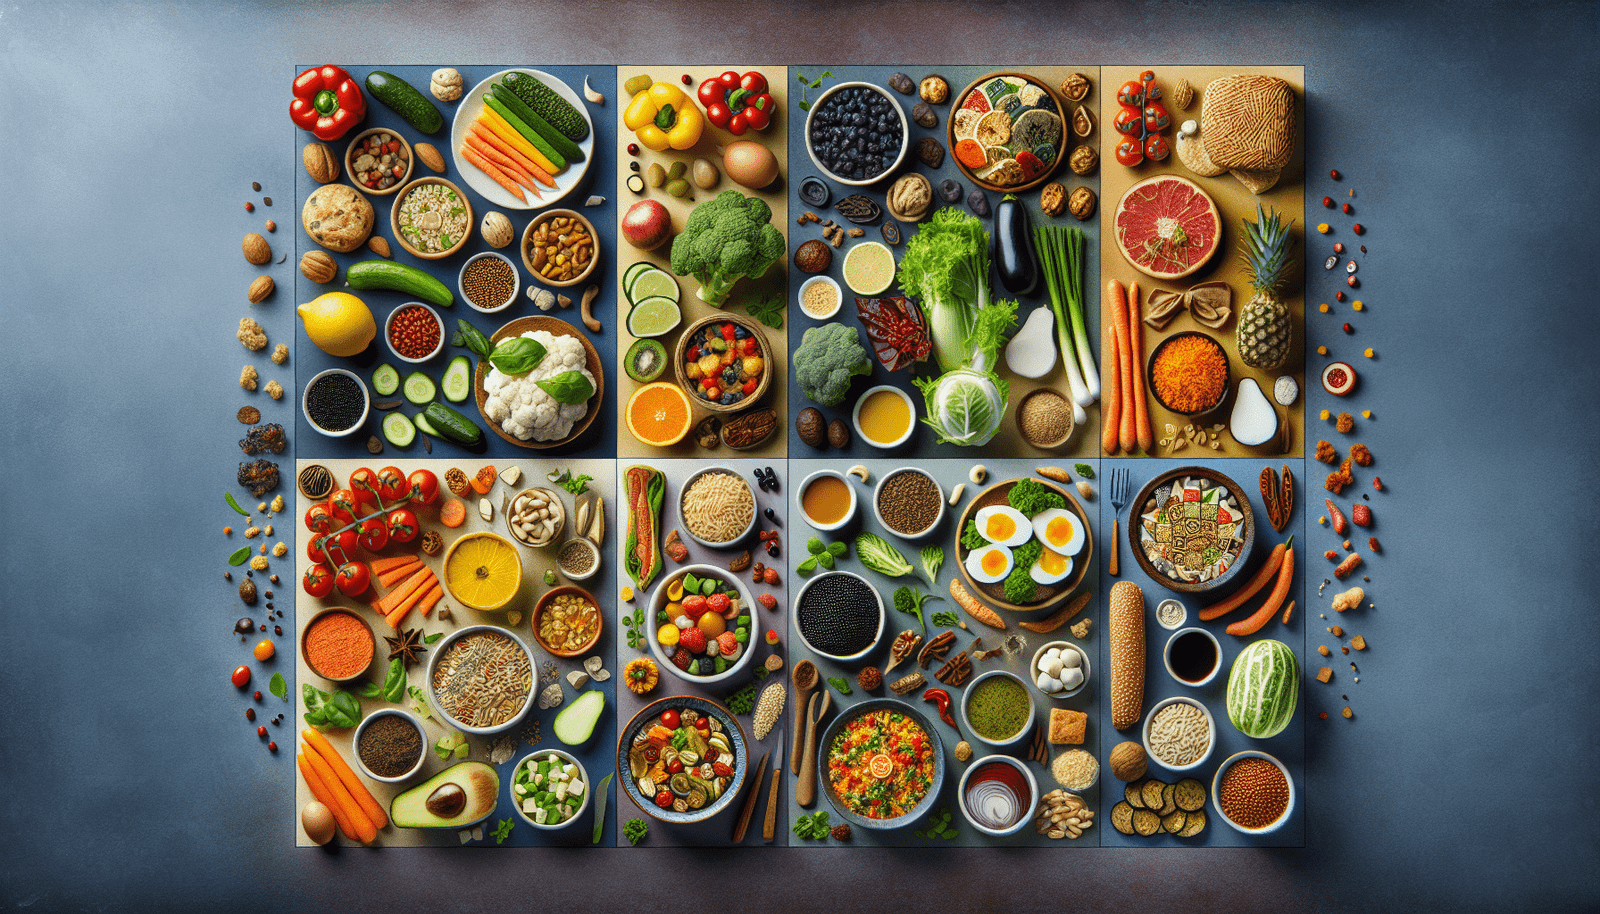 Spice Up Your Life: 7 Global Cuisines Proven To Boost Longevity